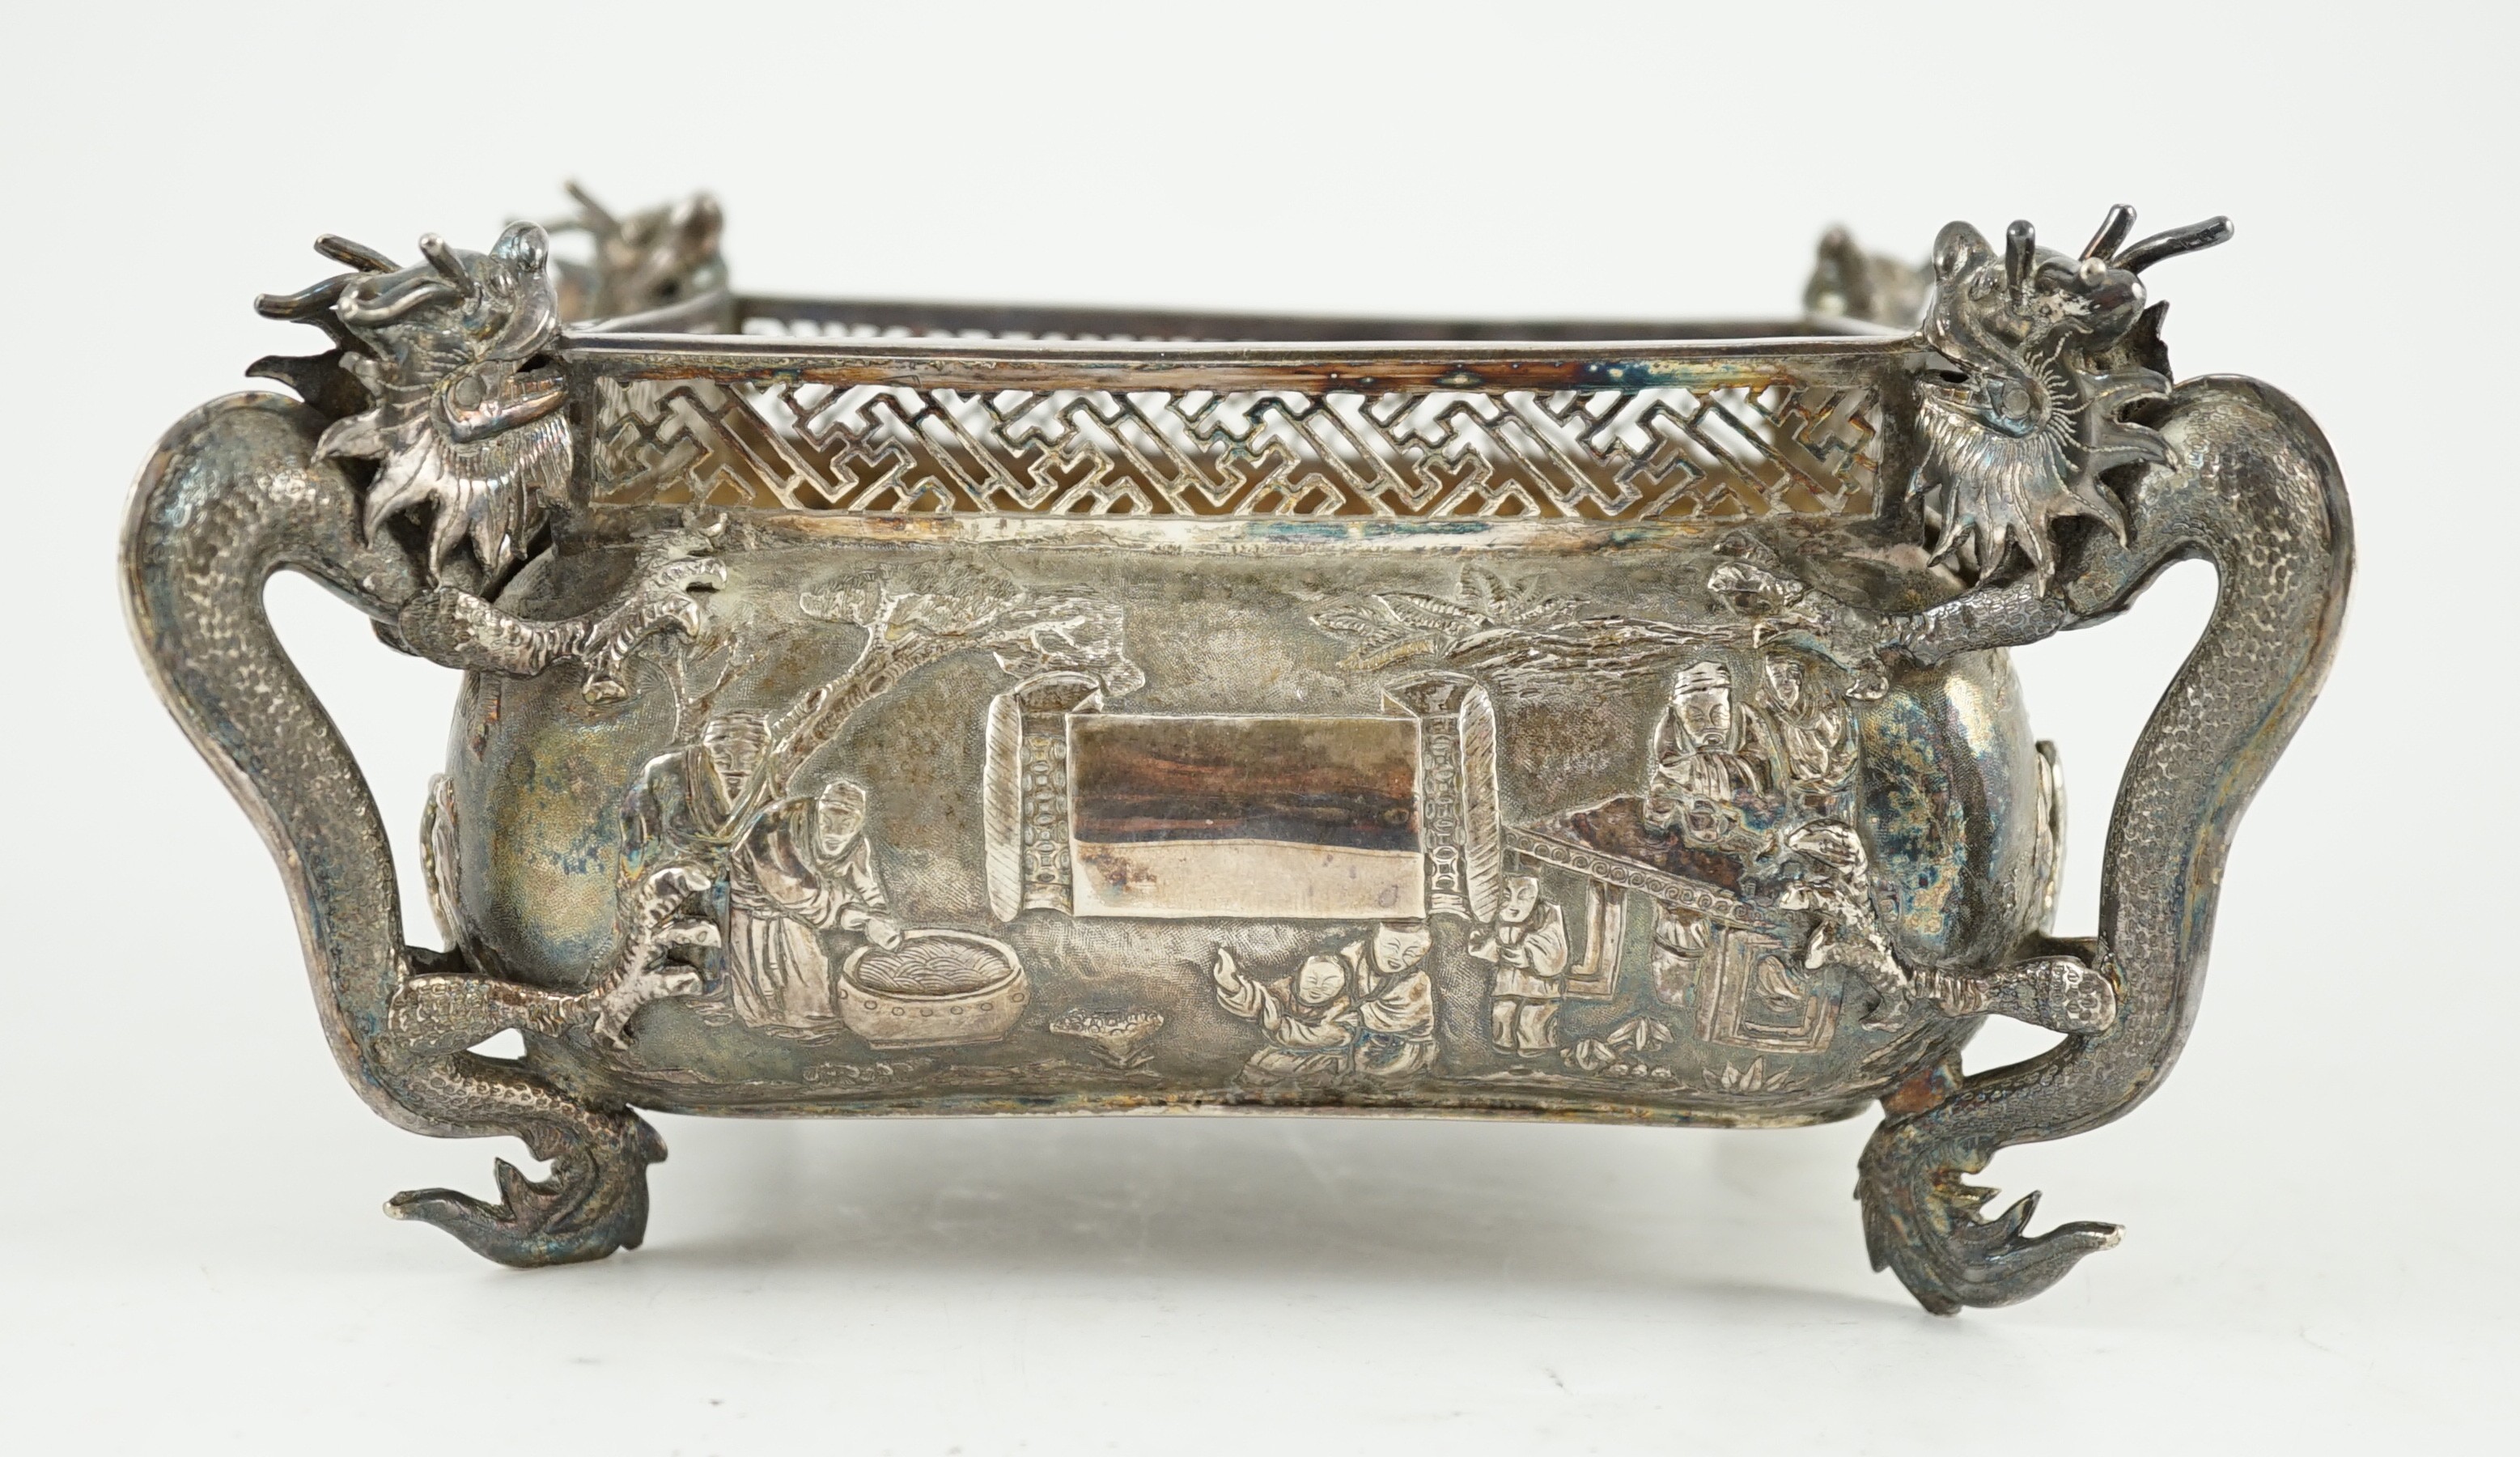 A late 19th/early 20th century Chinese Export silver planter, maker WC